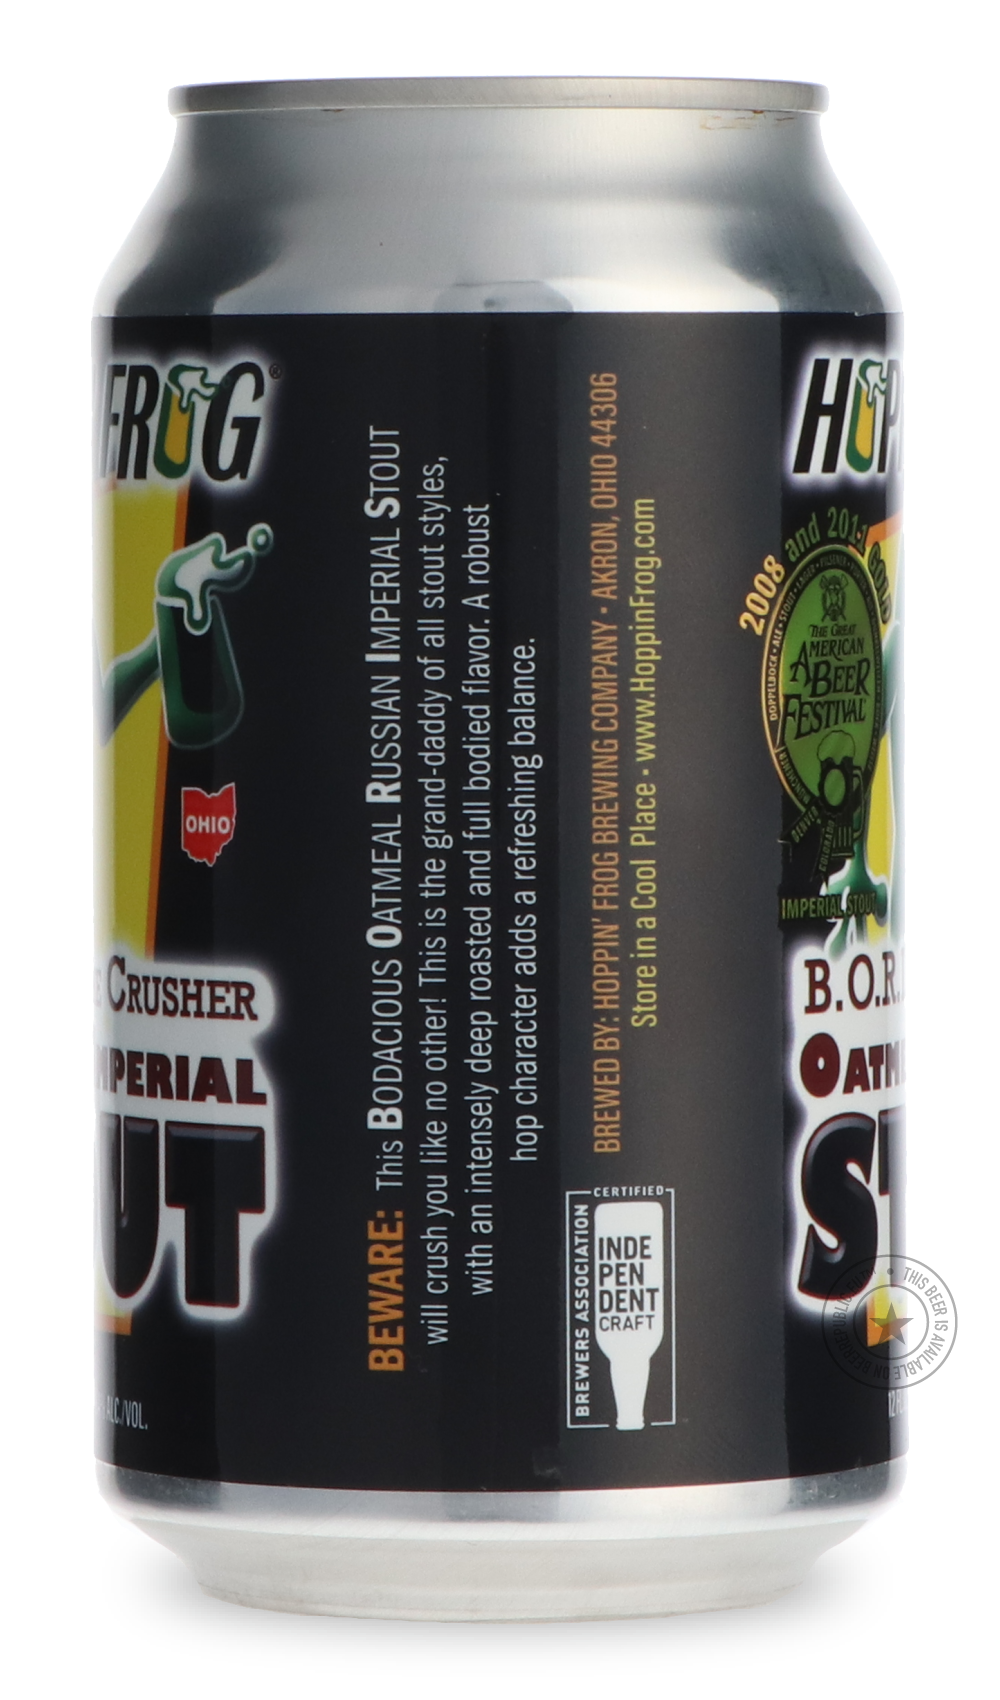 -Hoppin' Frog- B.O.R.I.S. The Crusher-Stout & Porter- Only @ Beer Republic - The best online beer store for American & Canadian craft beer - Buy beer online from the USA and Canada - Bier online kopen - Amerikaans bier kopen - Craft beer store - Craft beer kopen - Amerikanisch bier kaufen - Bier online kaufen - Acheter biere online - IPA - Stout - Porter - New England IPA - Hazy IPA - Imperial Stout - Barrel Aged - Barrel Aged Imperial Stout - Brown - Dark beer - Blond - Blonde - Pilsner - Lager - Wheat - W